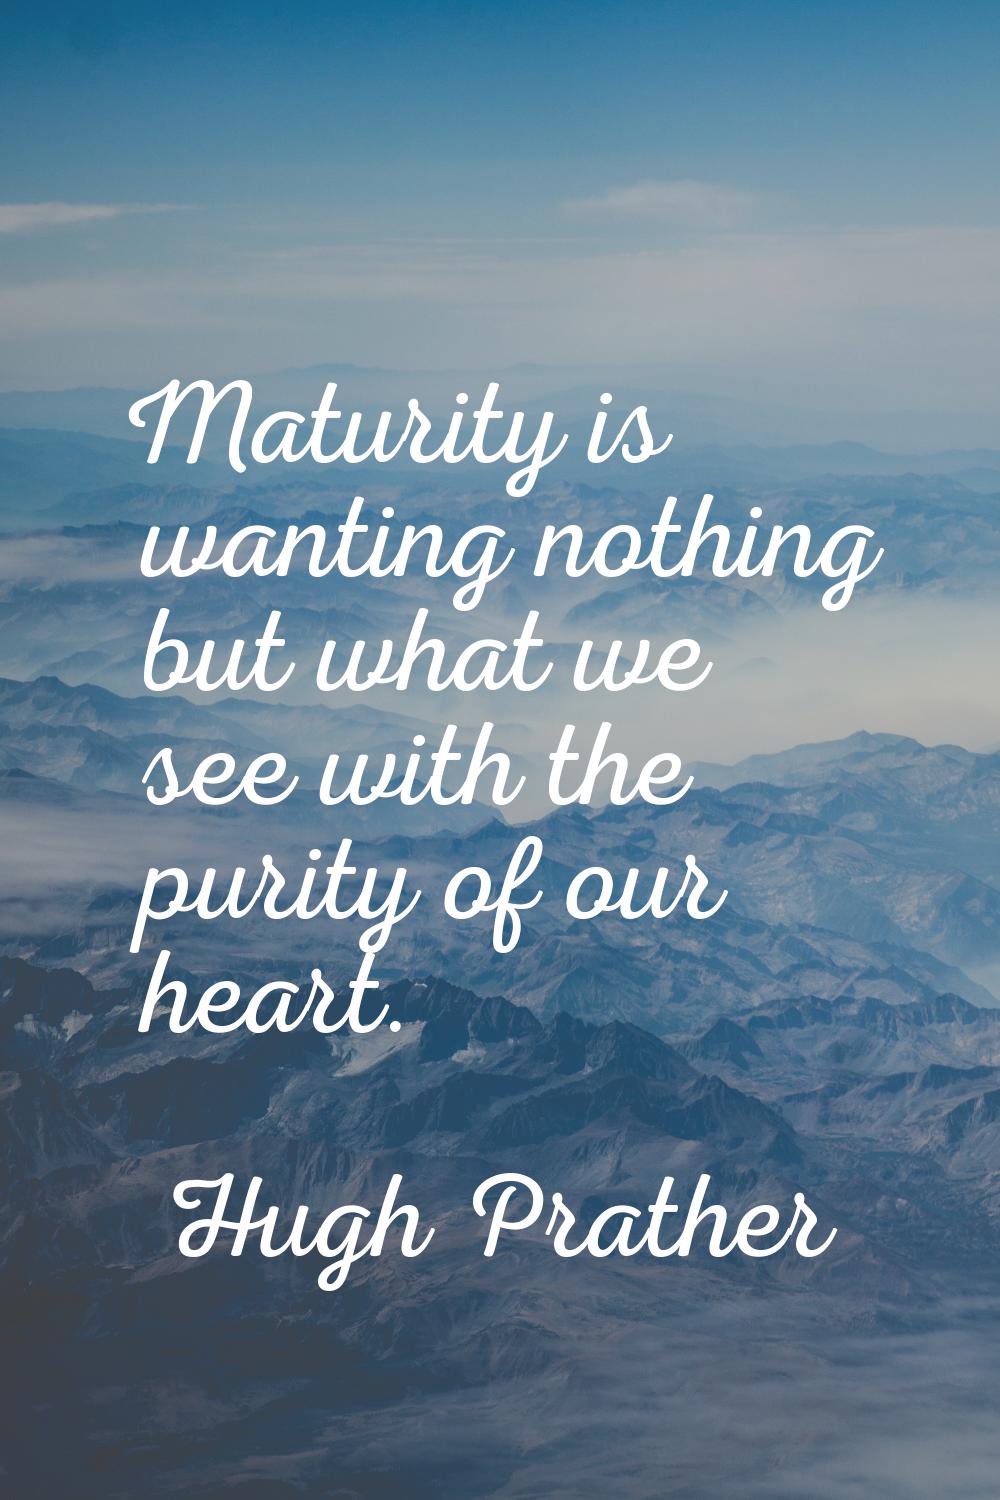 Maturity is wanting nothing but what we see with the purity of our heart.